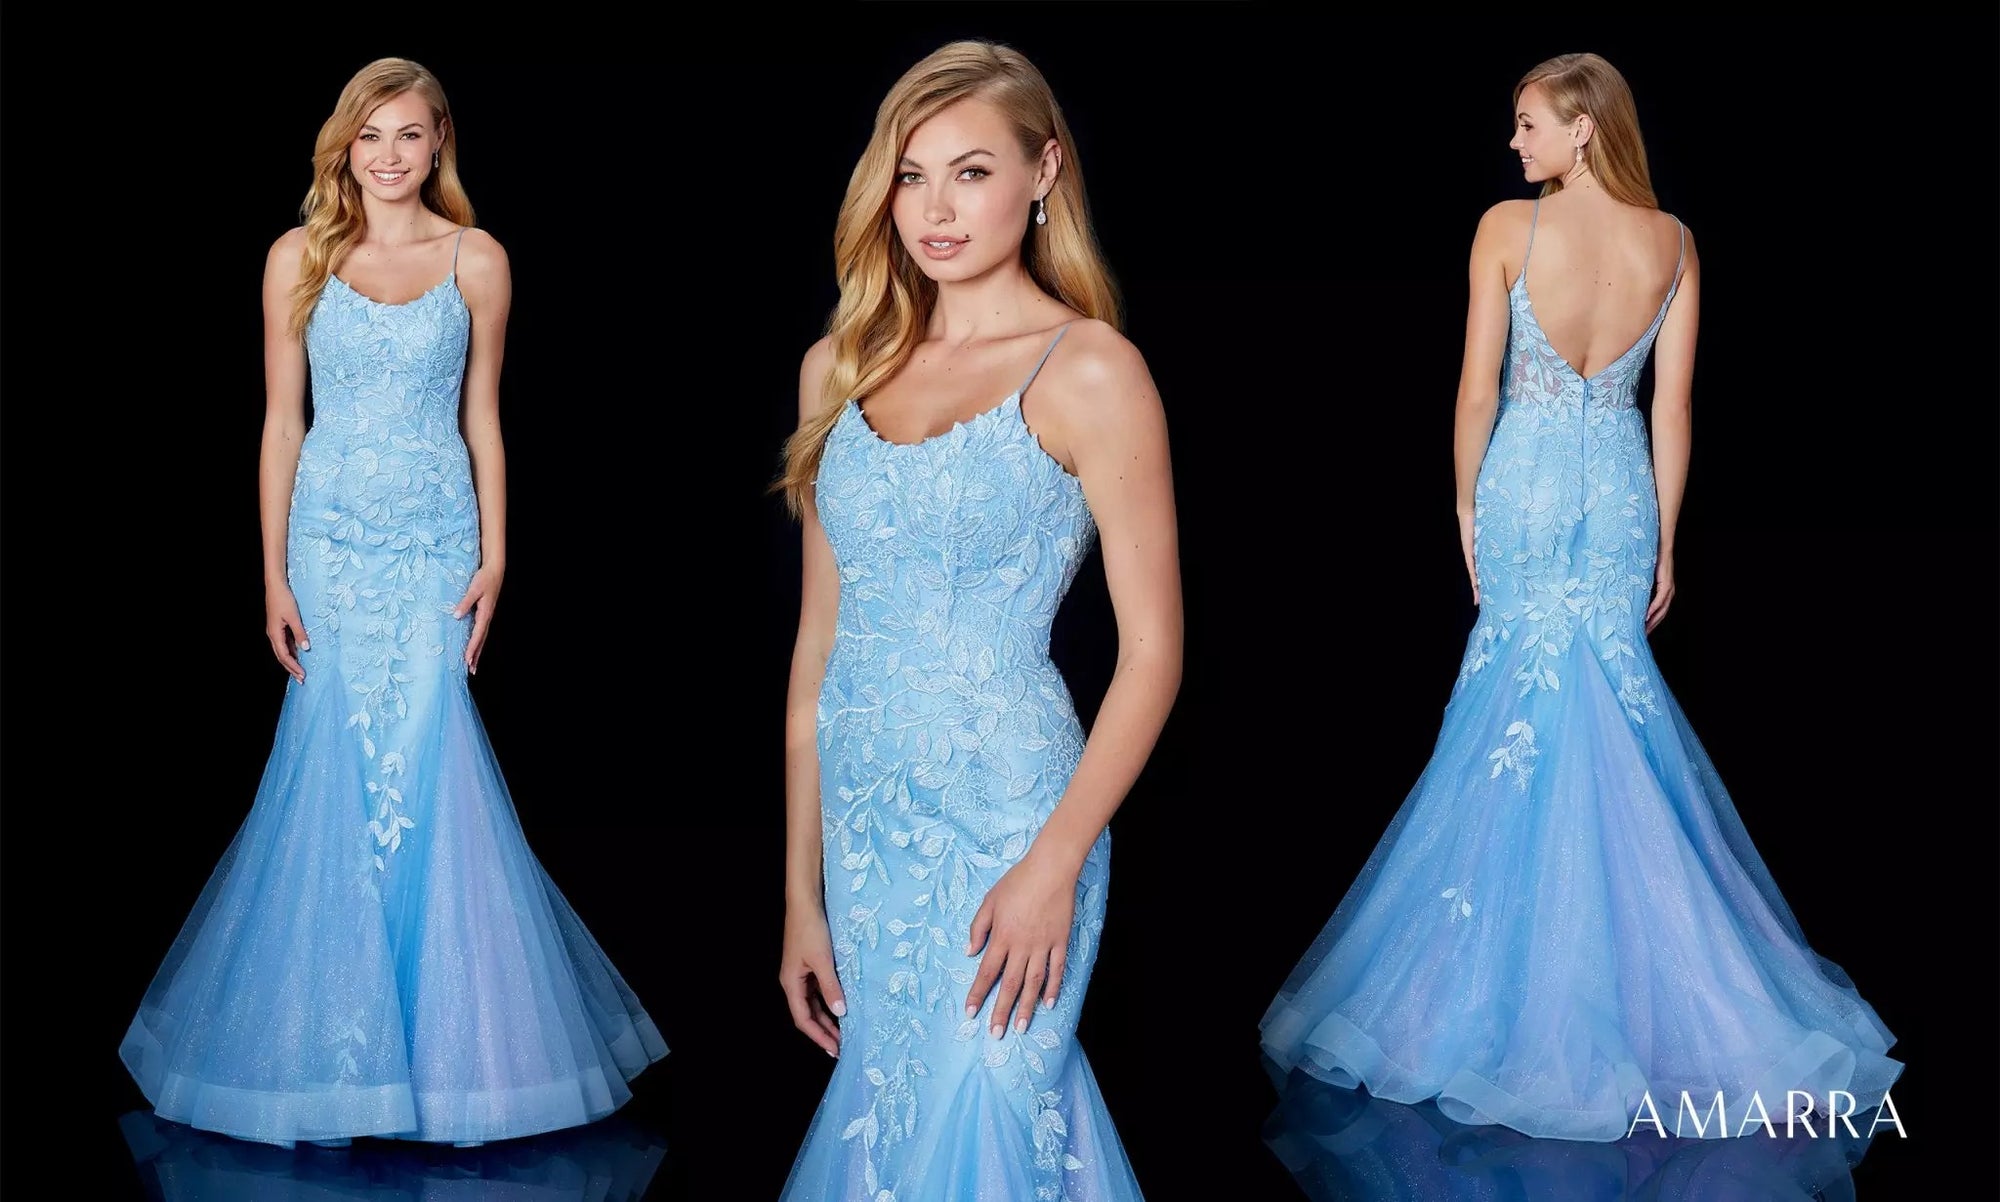 4 Prom Dress Trends We’re Loving Right Now